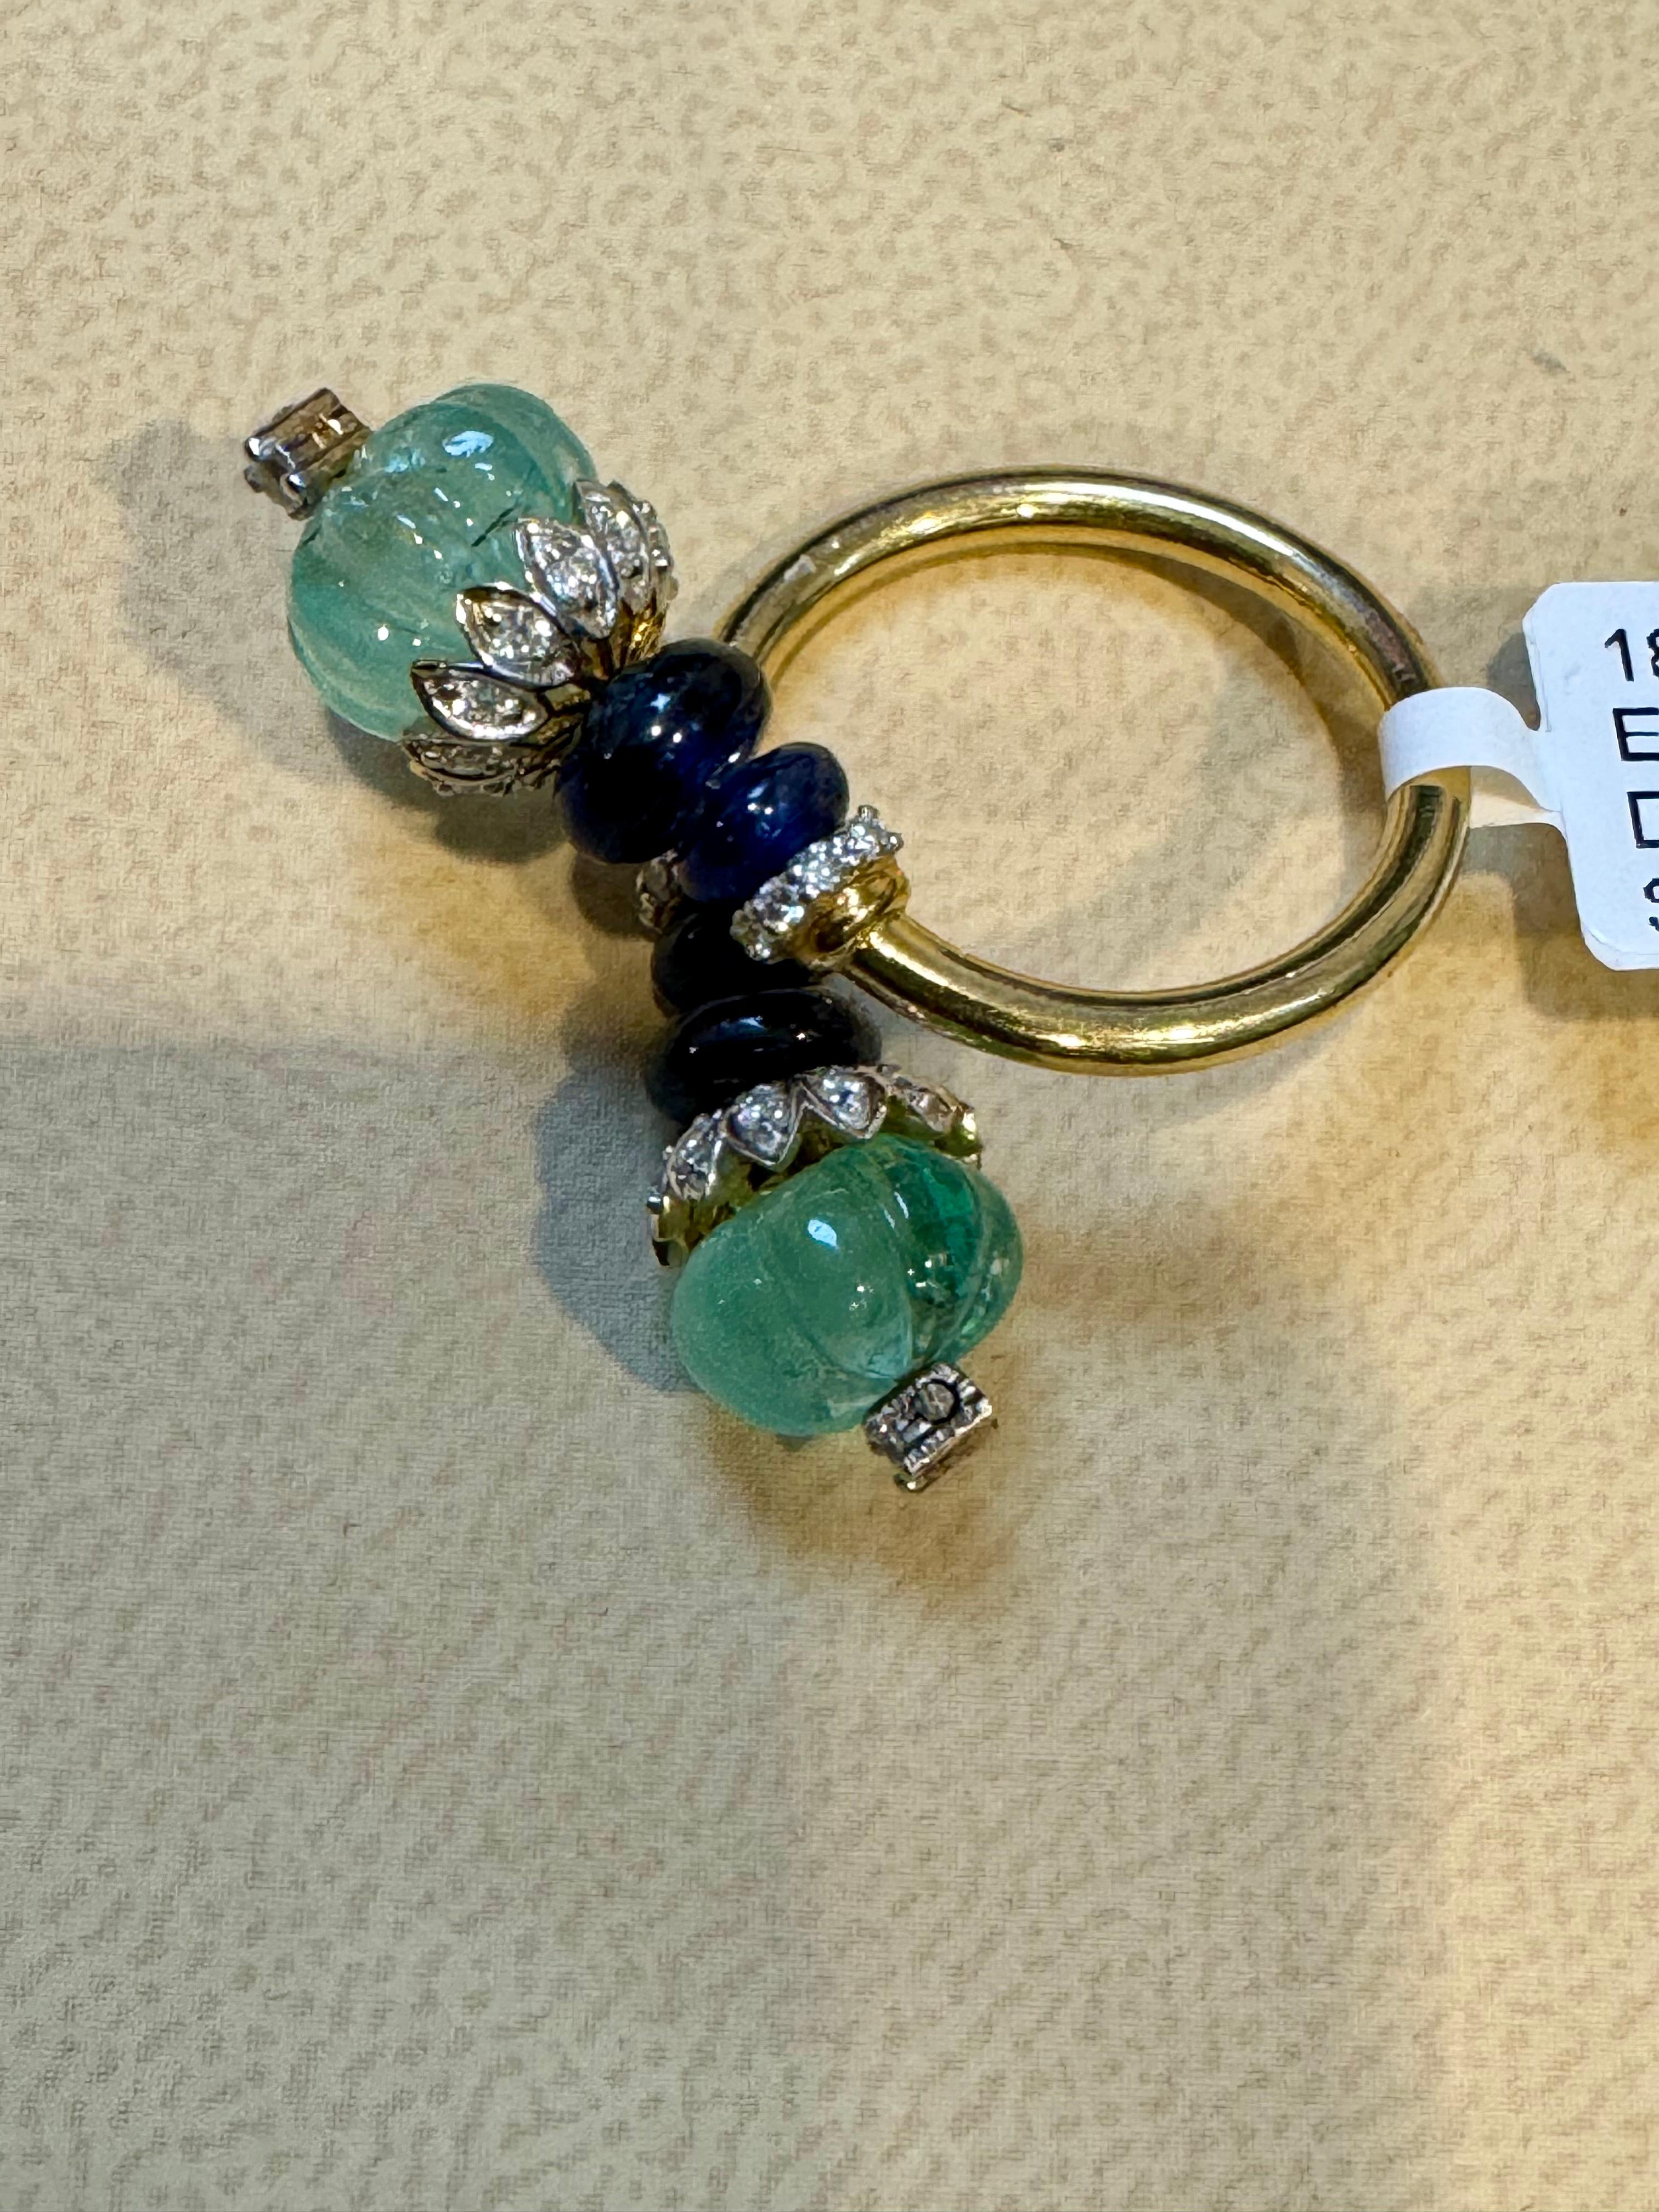 5 Ct Emerald Bead & 2.5 Ct Sapphire Beads & Diamond Ring in 18 Kt Gold Size 5 1